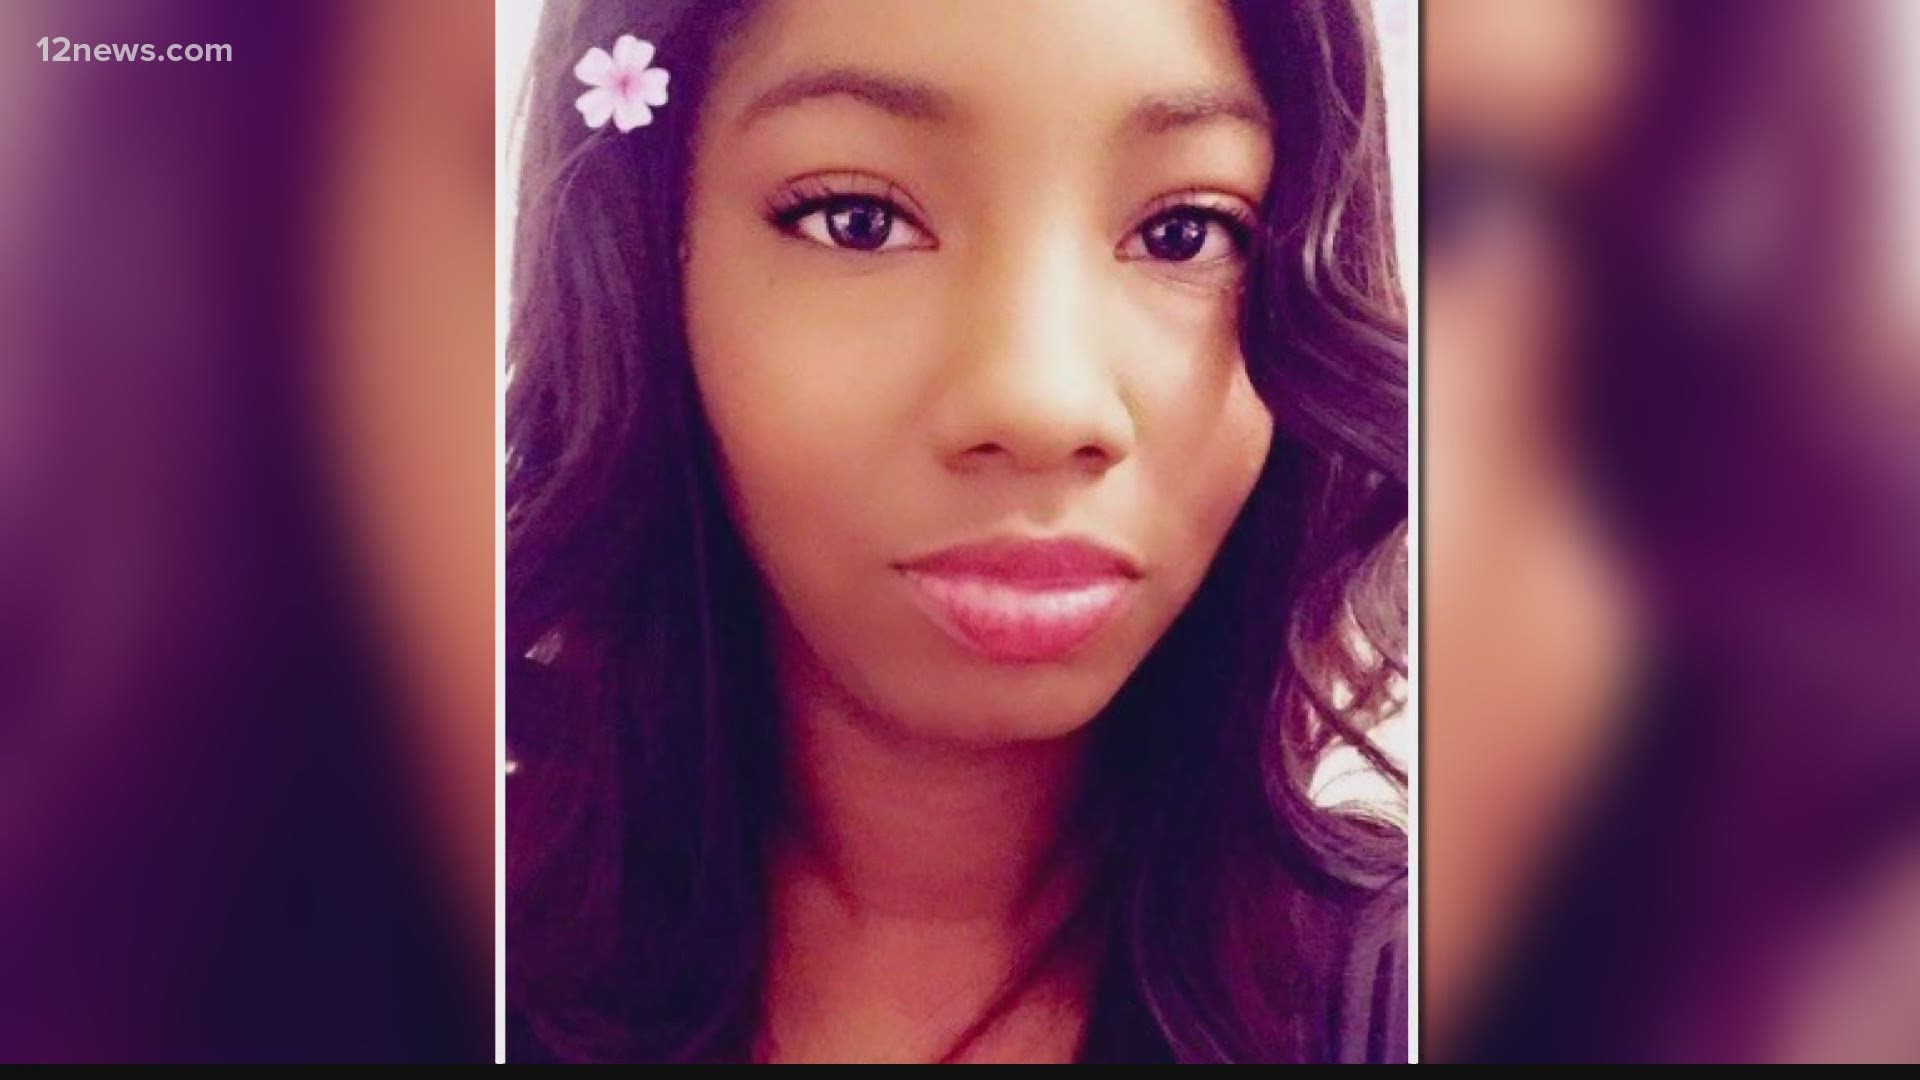 30-year-old Shavone Robinson was found dead in her Phoenix apartment on Monday. The mother of four had obvious signs of trauma. Her family is seeking answers.